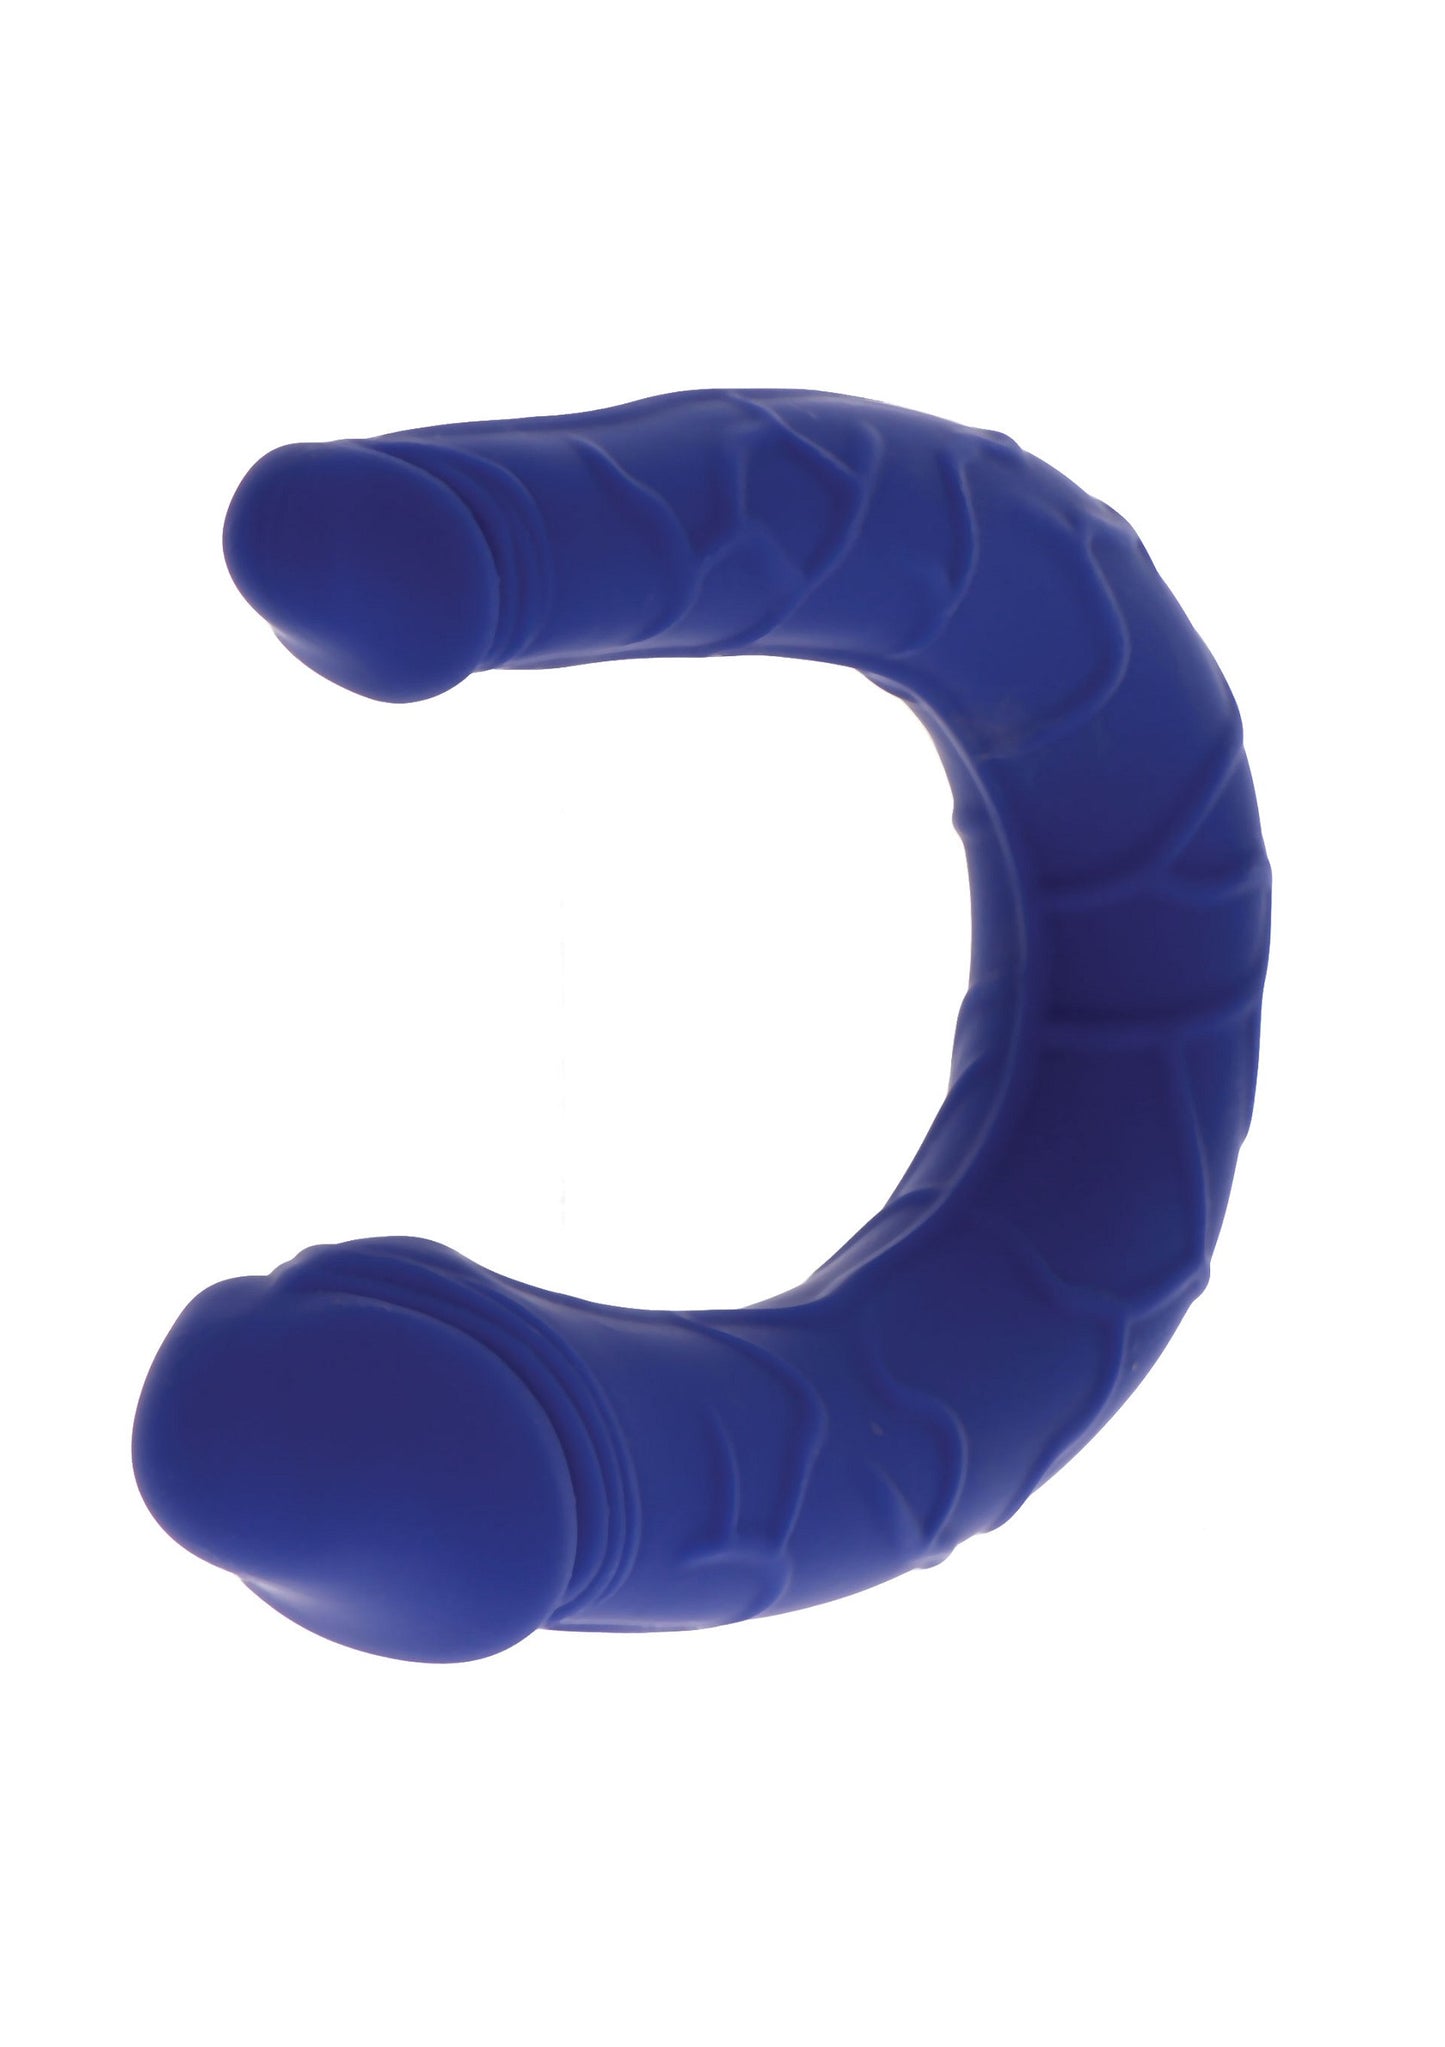 ToyJoy Get Real Realistic Mini Double Dong BLUE - 1